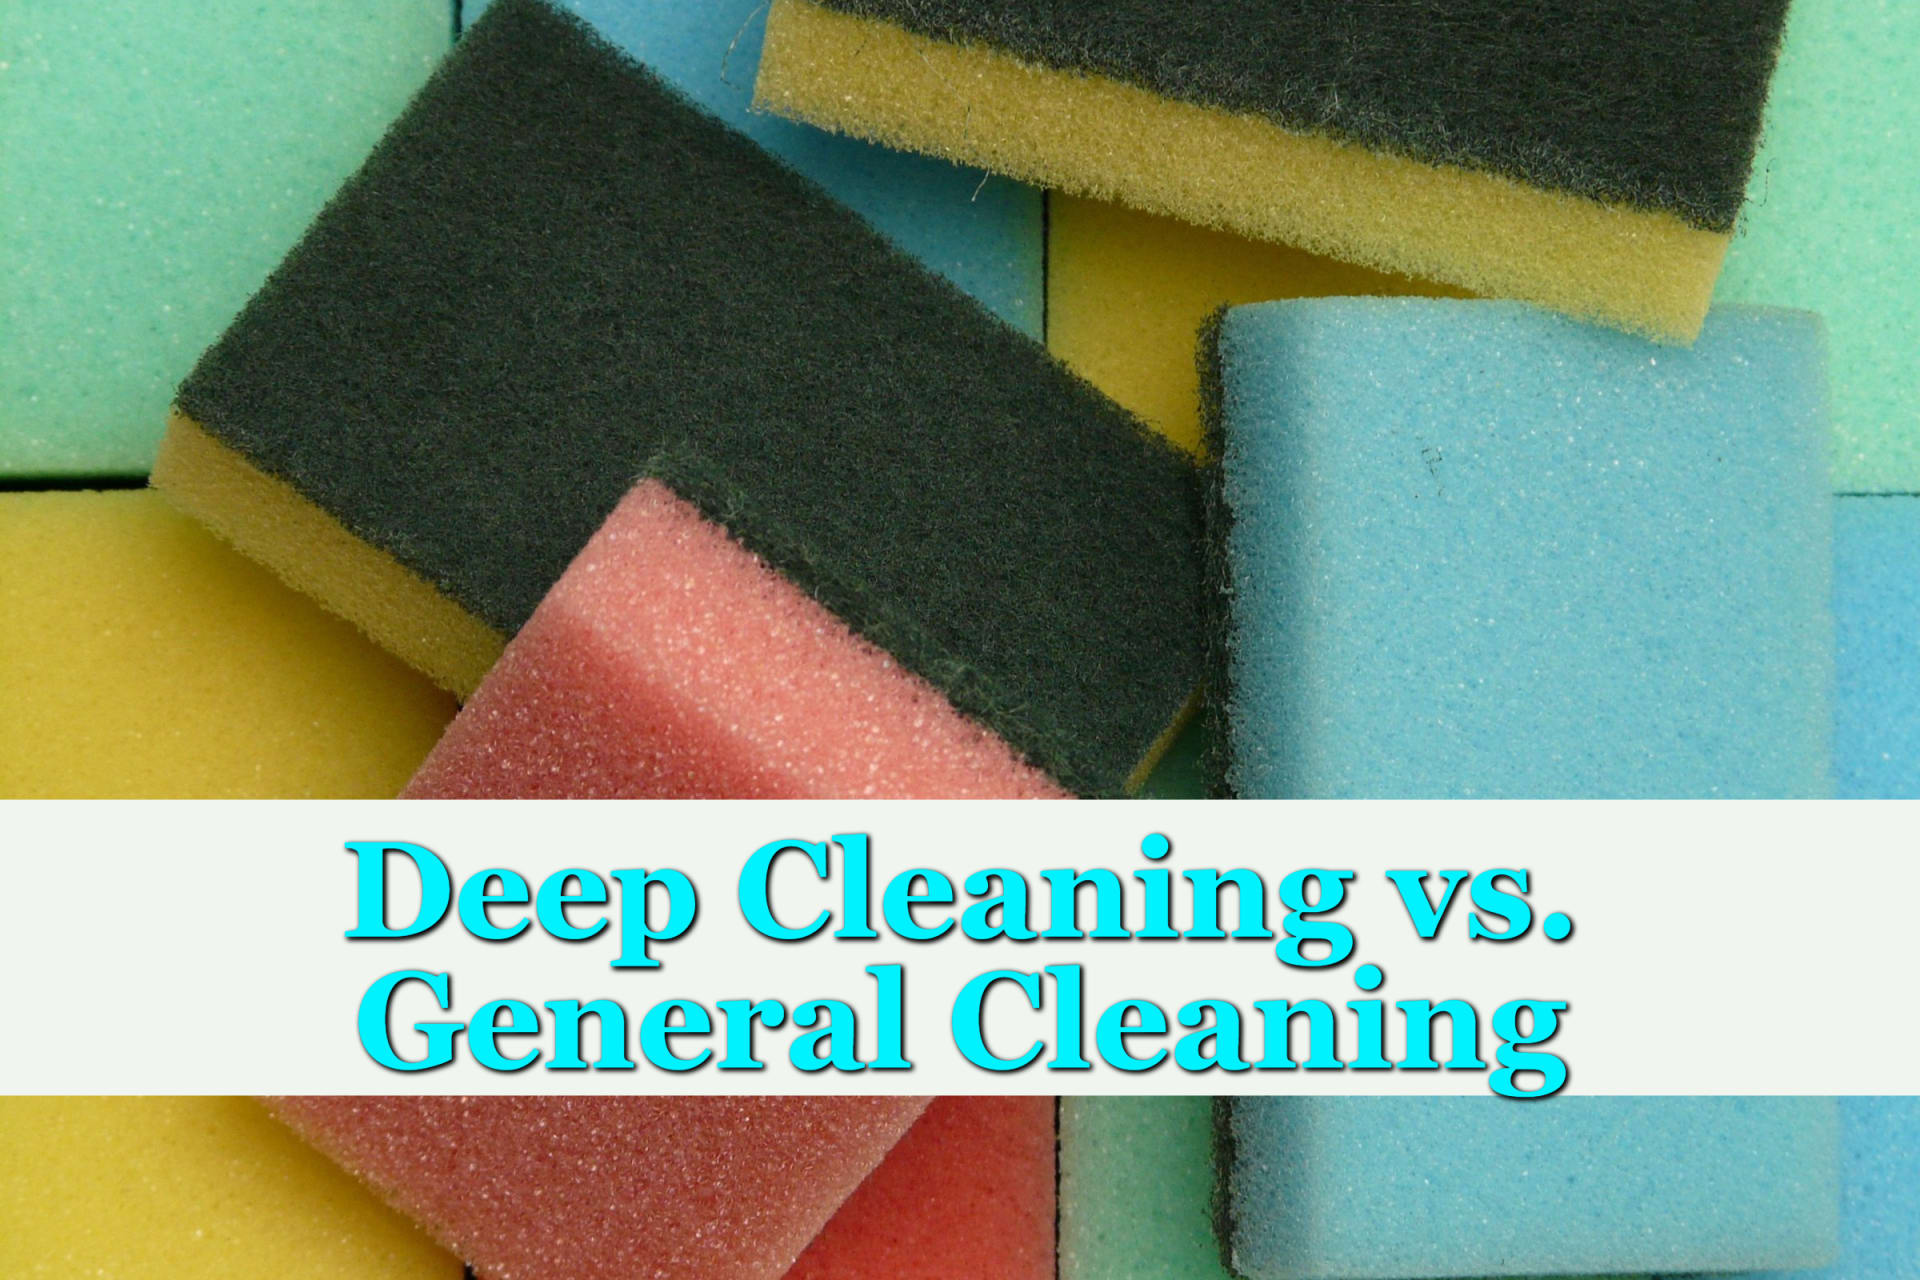 House Cleaning Services: The Difference Between Deep Clean and General